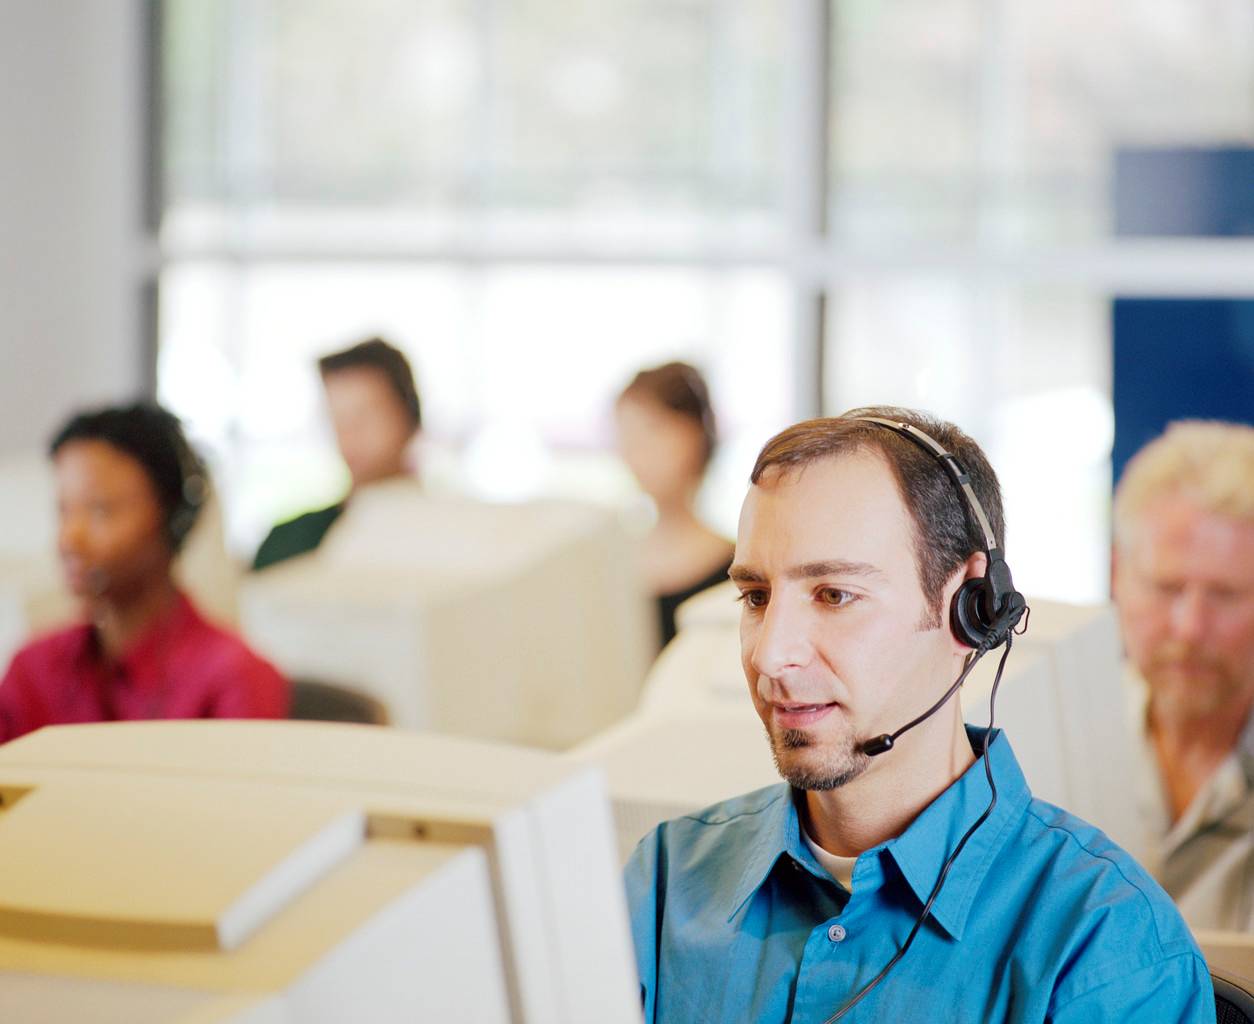 Customer Service Representative Overtime Pay Lawsuits